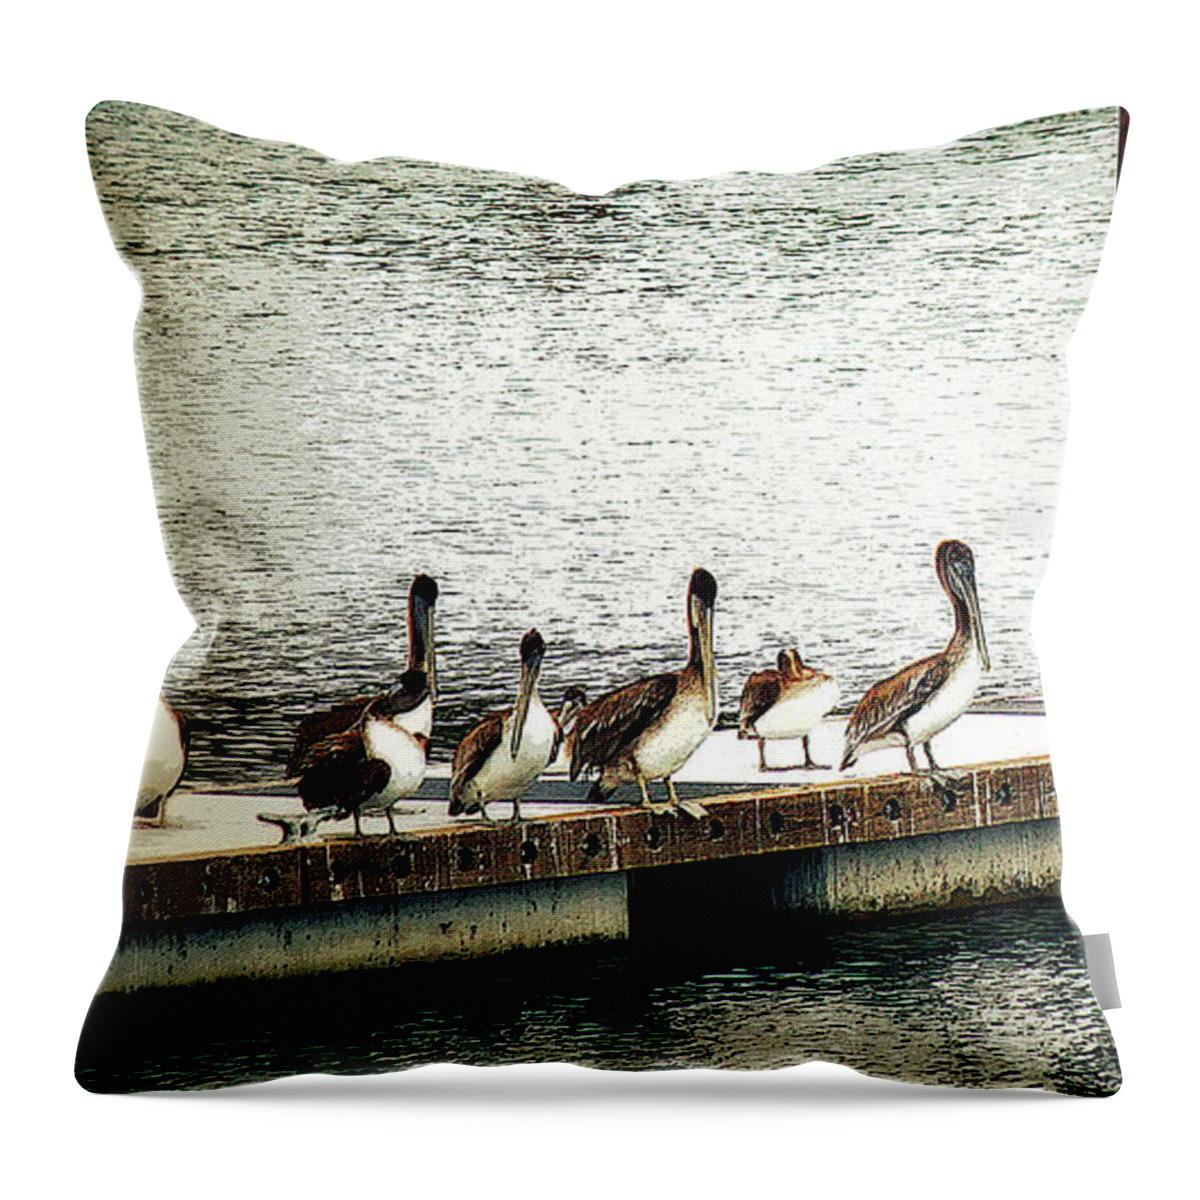 Pelican Throw Pillow featuring the photograph Pelican Island by Melanie Lankford Photography